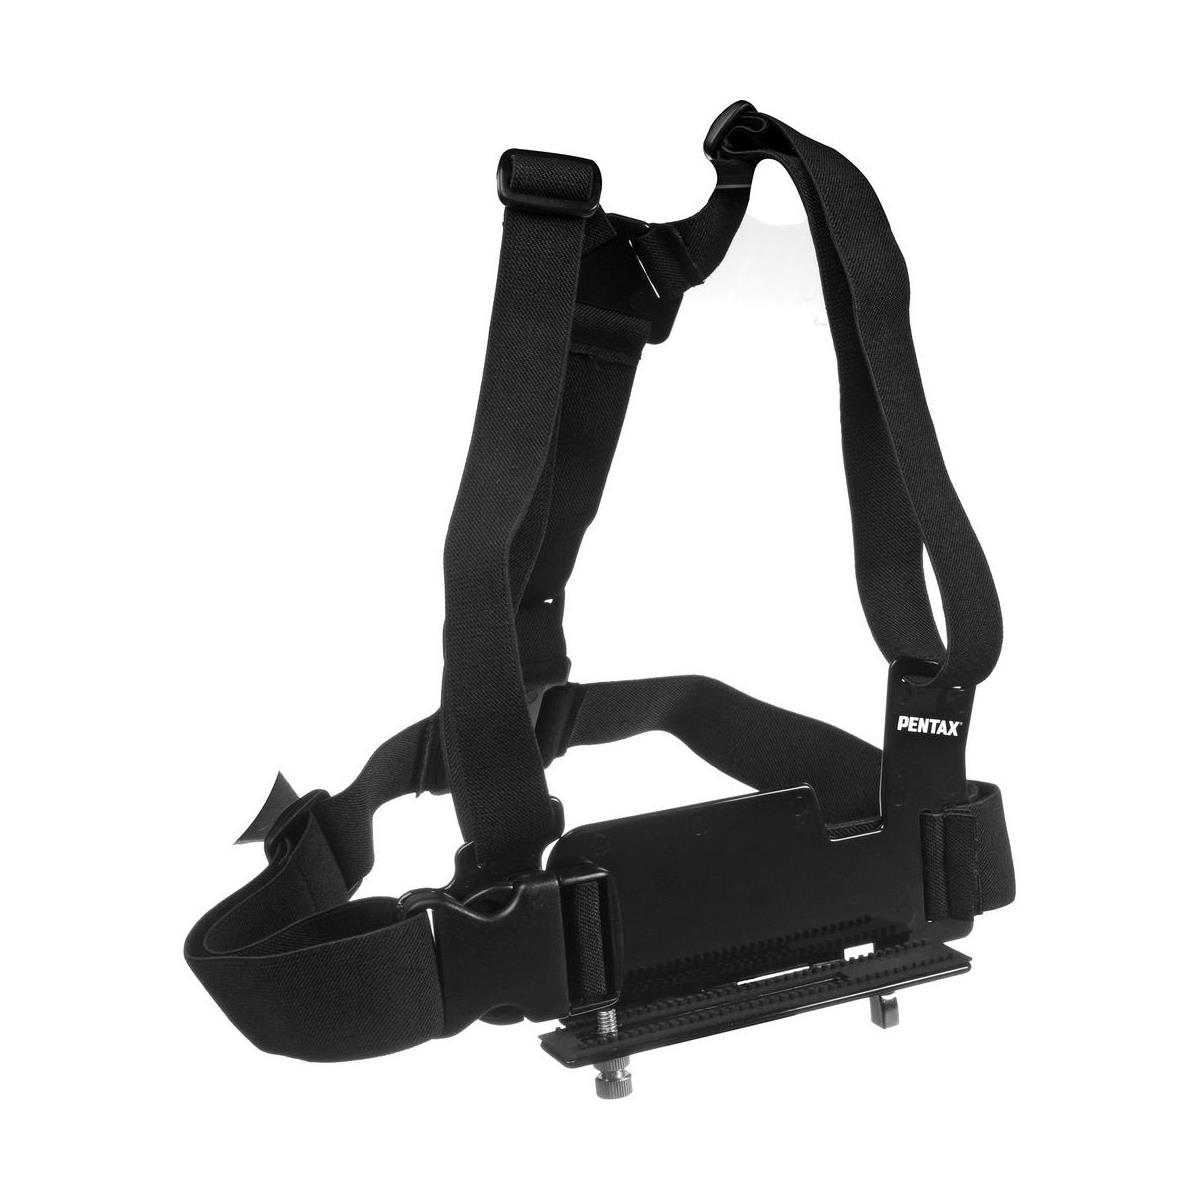 Image of Pentax Sport Mount Chest Harness